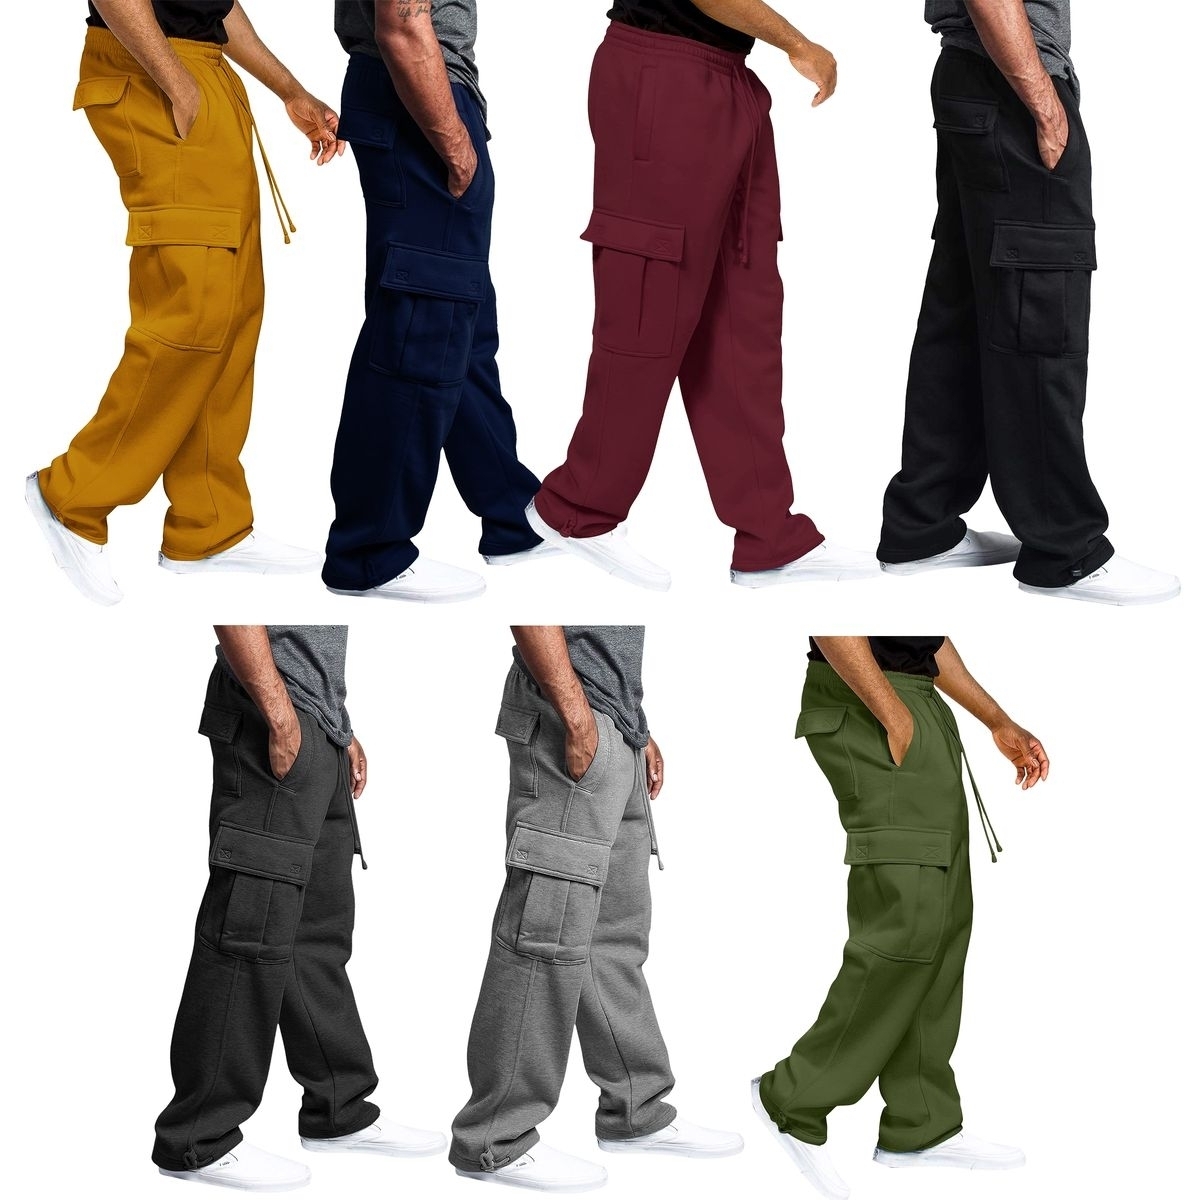 3-Pack: Men's Casual Solid Fleece Lined Cargo Jogger Sweatpants With Pockets - Small